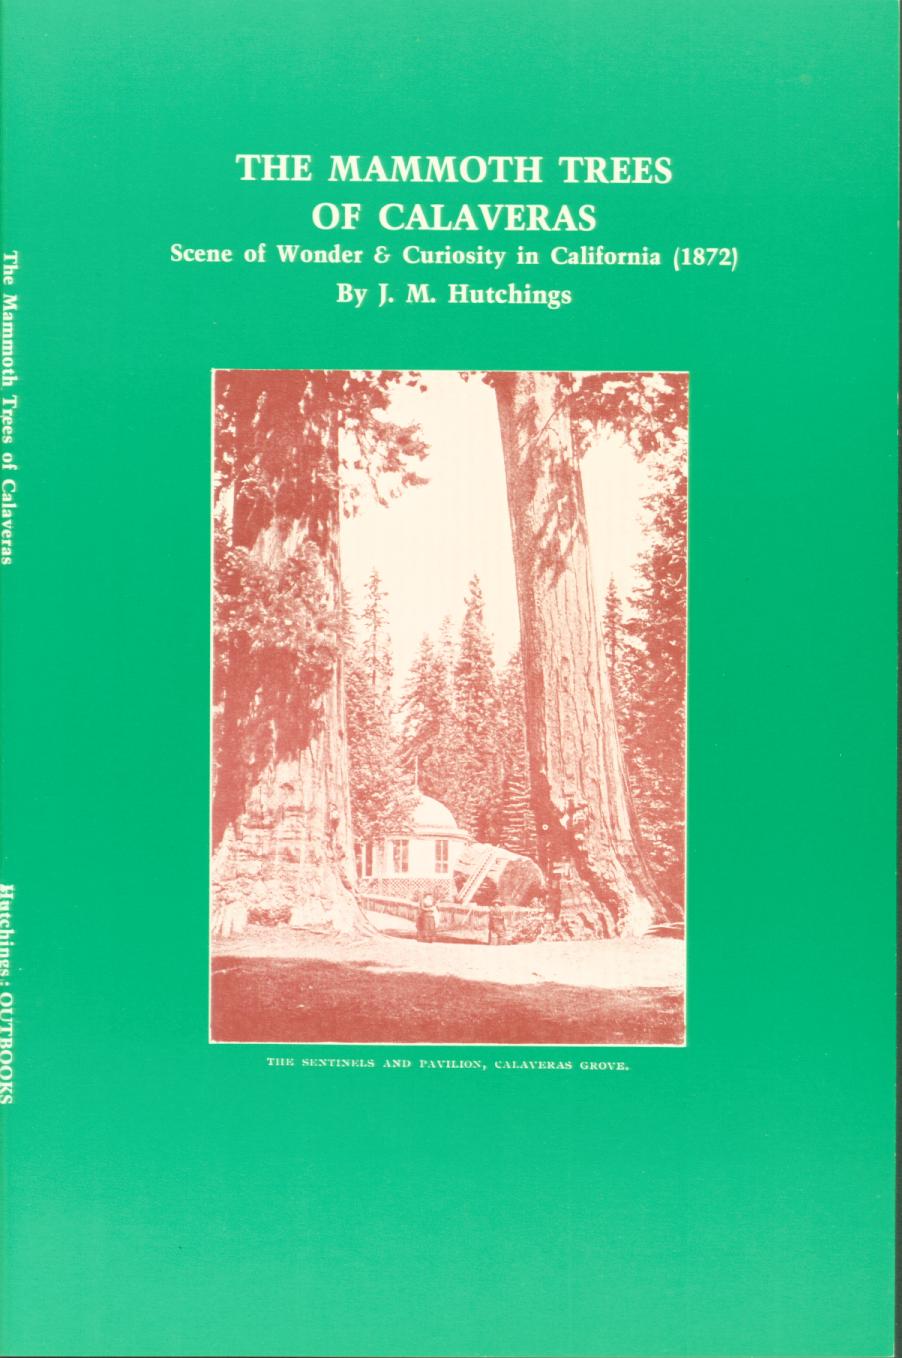 The Mammoth Trees of Calaveras. vist0050 front cover mini